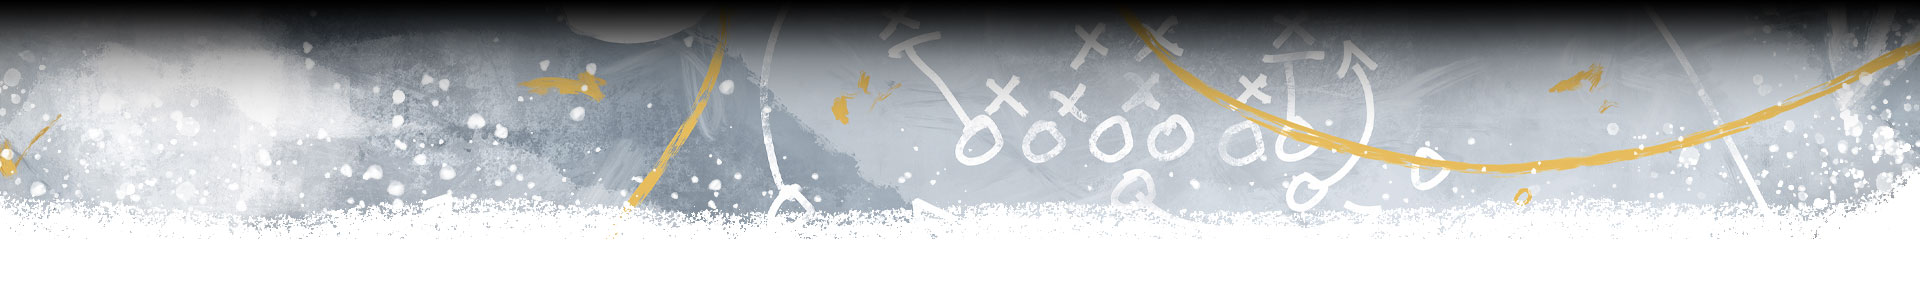 A decorative image of football strategy drawings. 